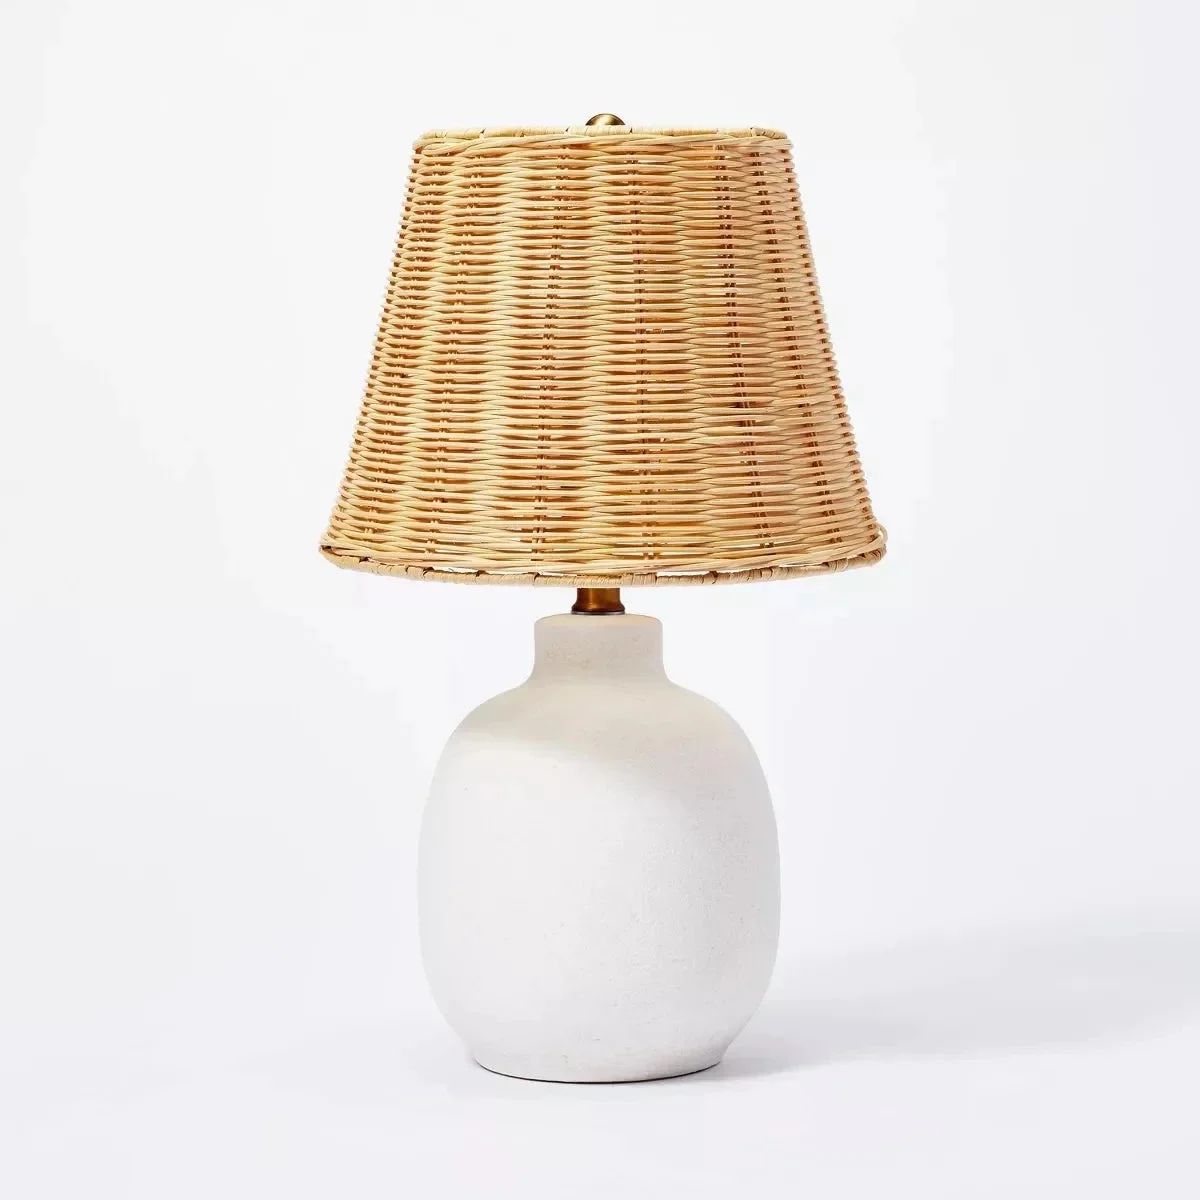 Ceramic Table Lamp with Rattan Shade White - Threshold with Studio McGee,Light Bulbs Not Included | Walmart (US)